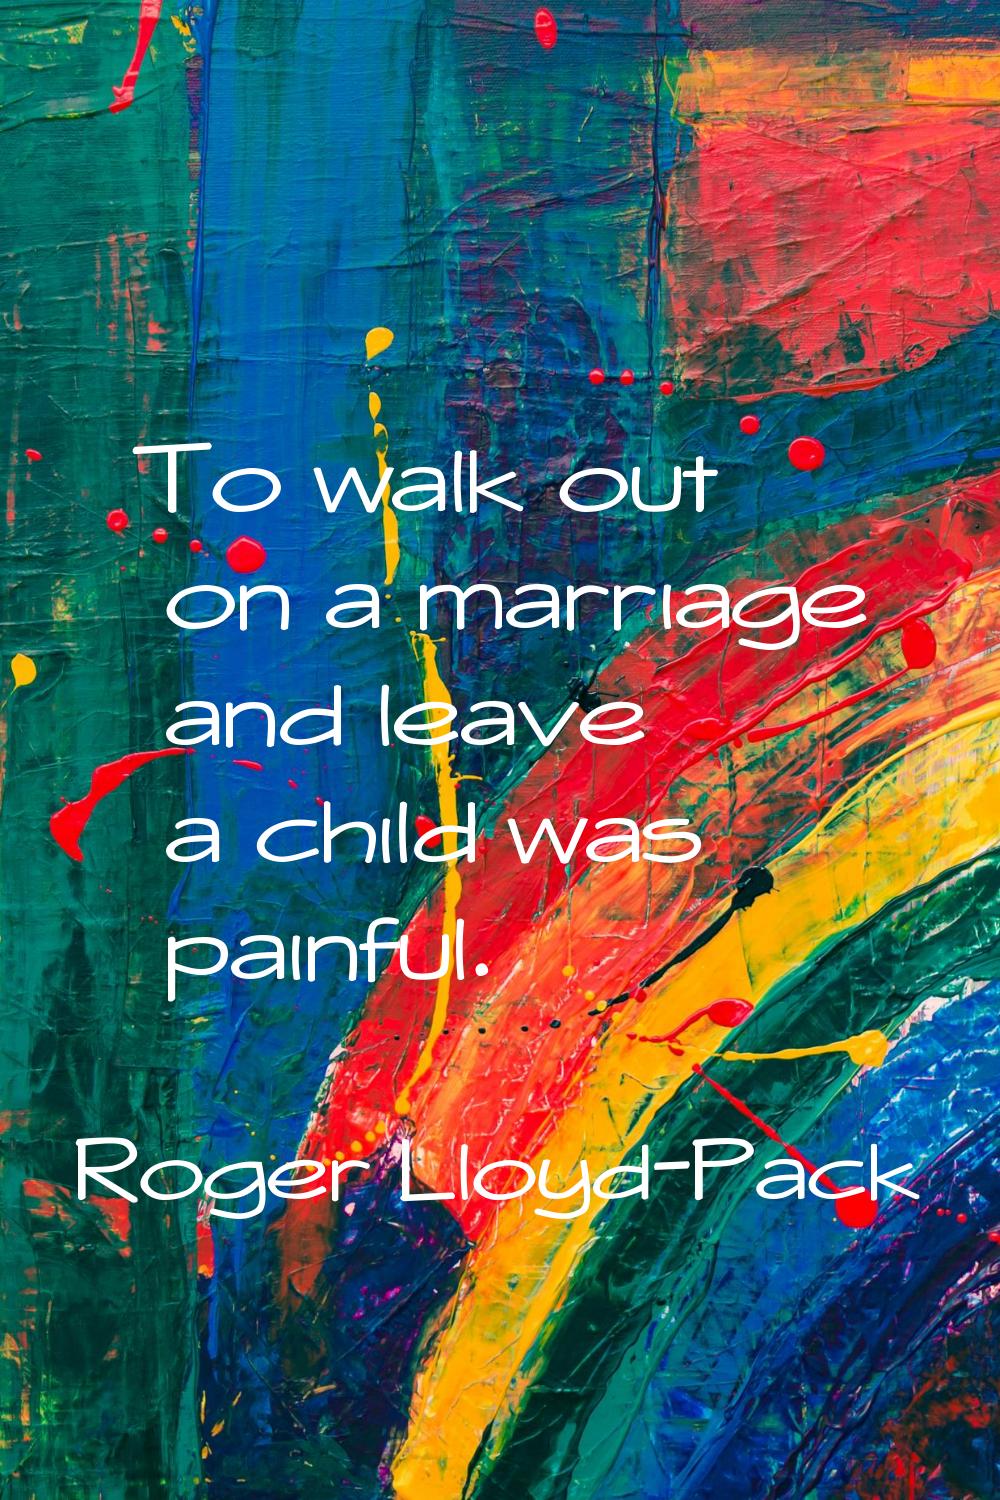 To walk out on a marriage and leave a child was painful.